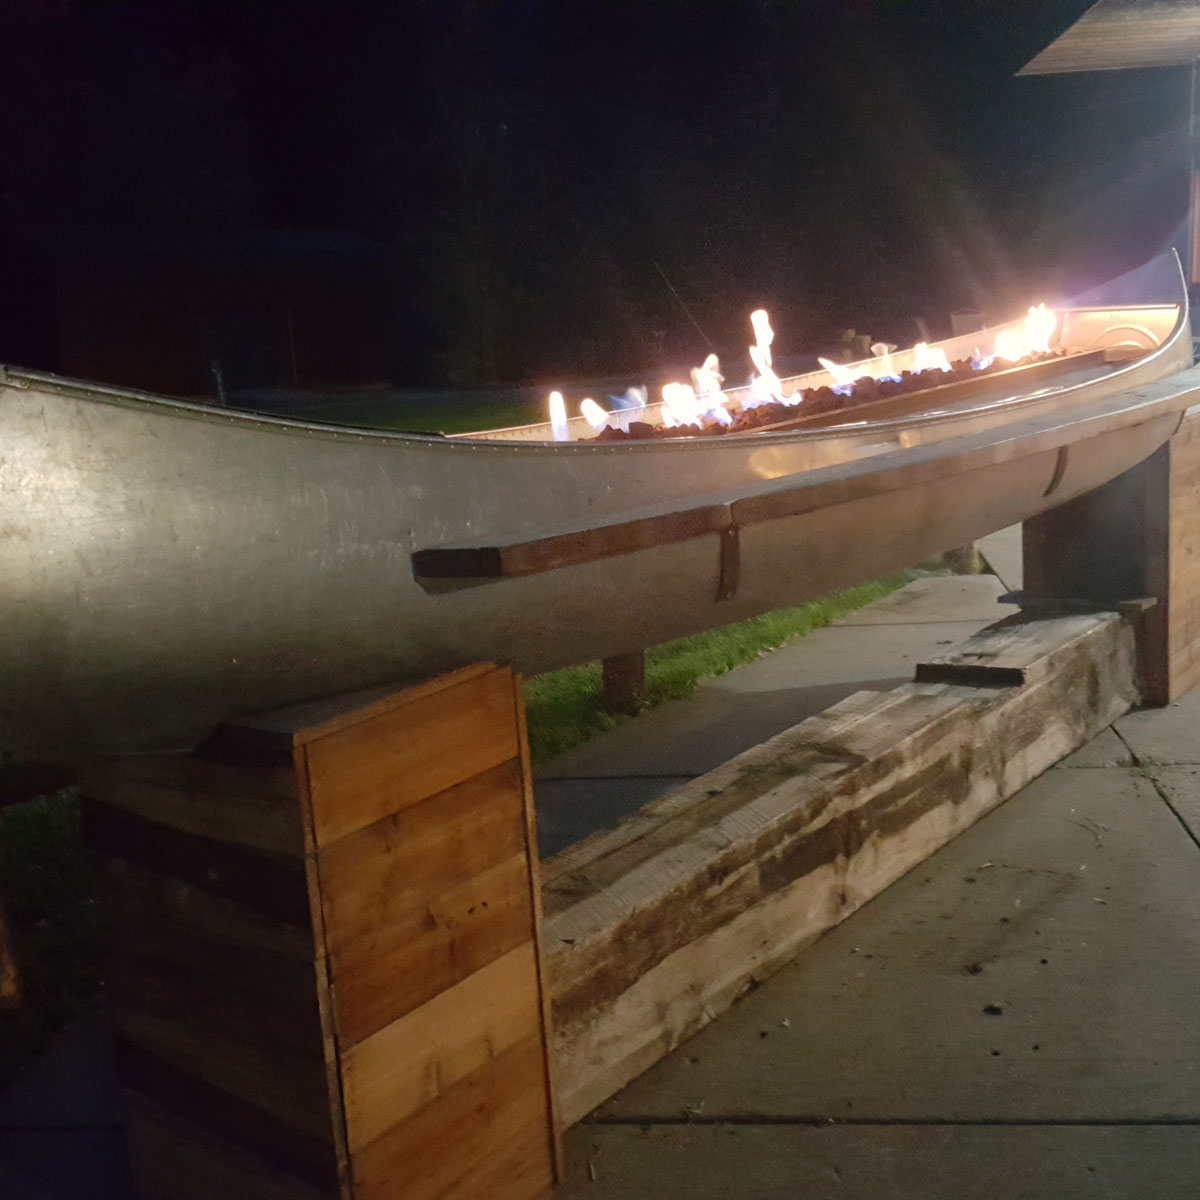 A nighttime image of an aluminum canoe sitting on wooden blocks  as a display on the porch at Spearfish Canyon Lodge. The interior of the canoe is lit stem to stern by flames dancing over lava rocks.